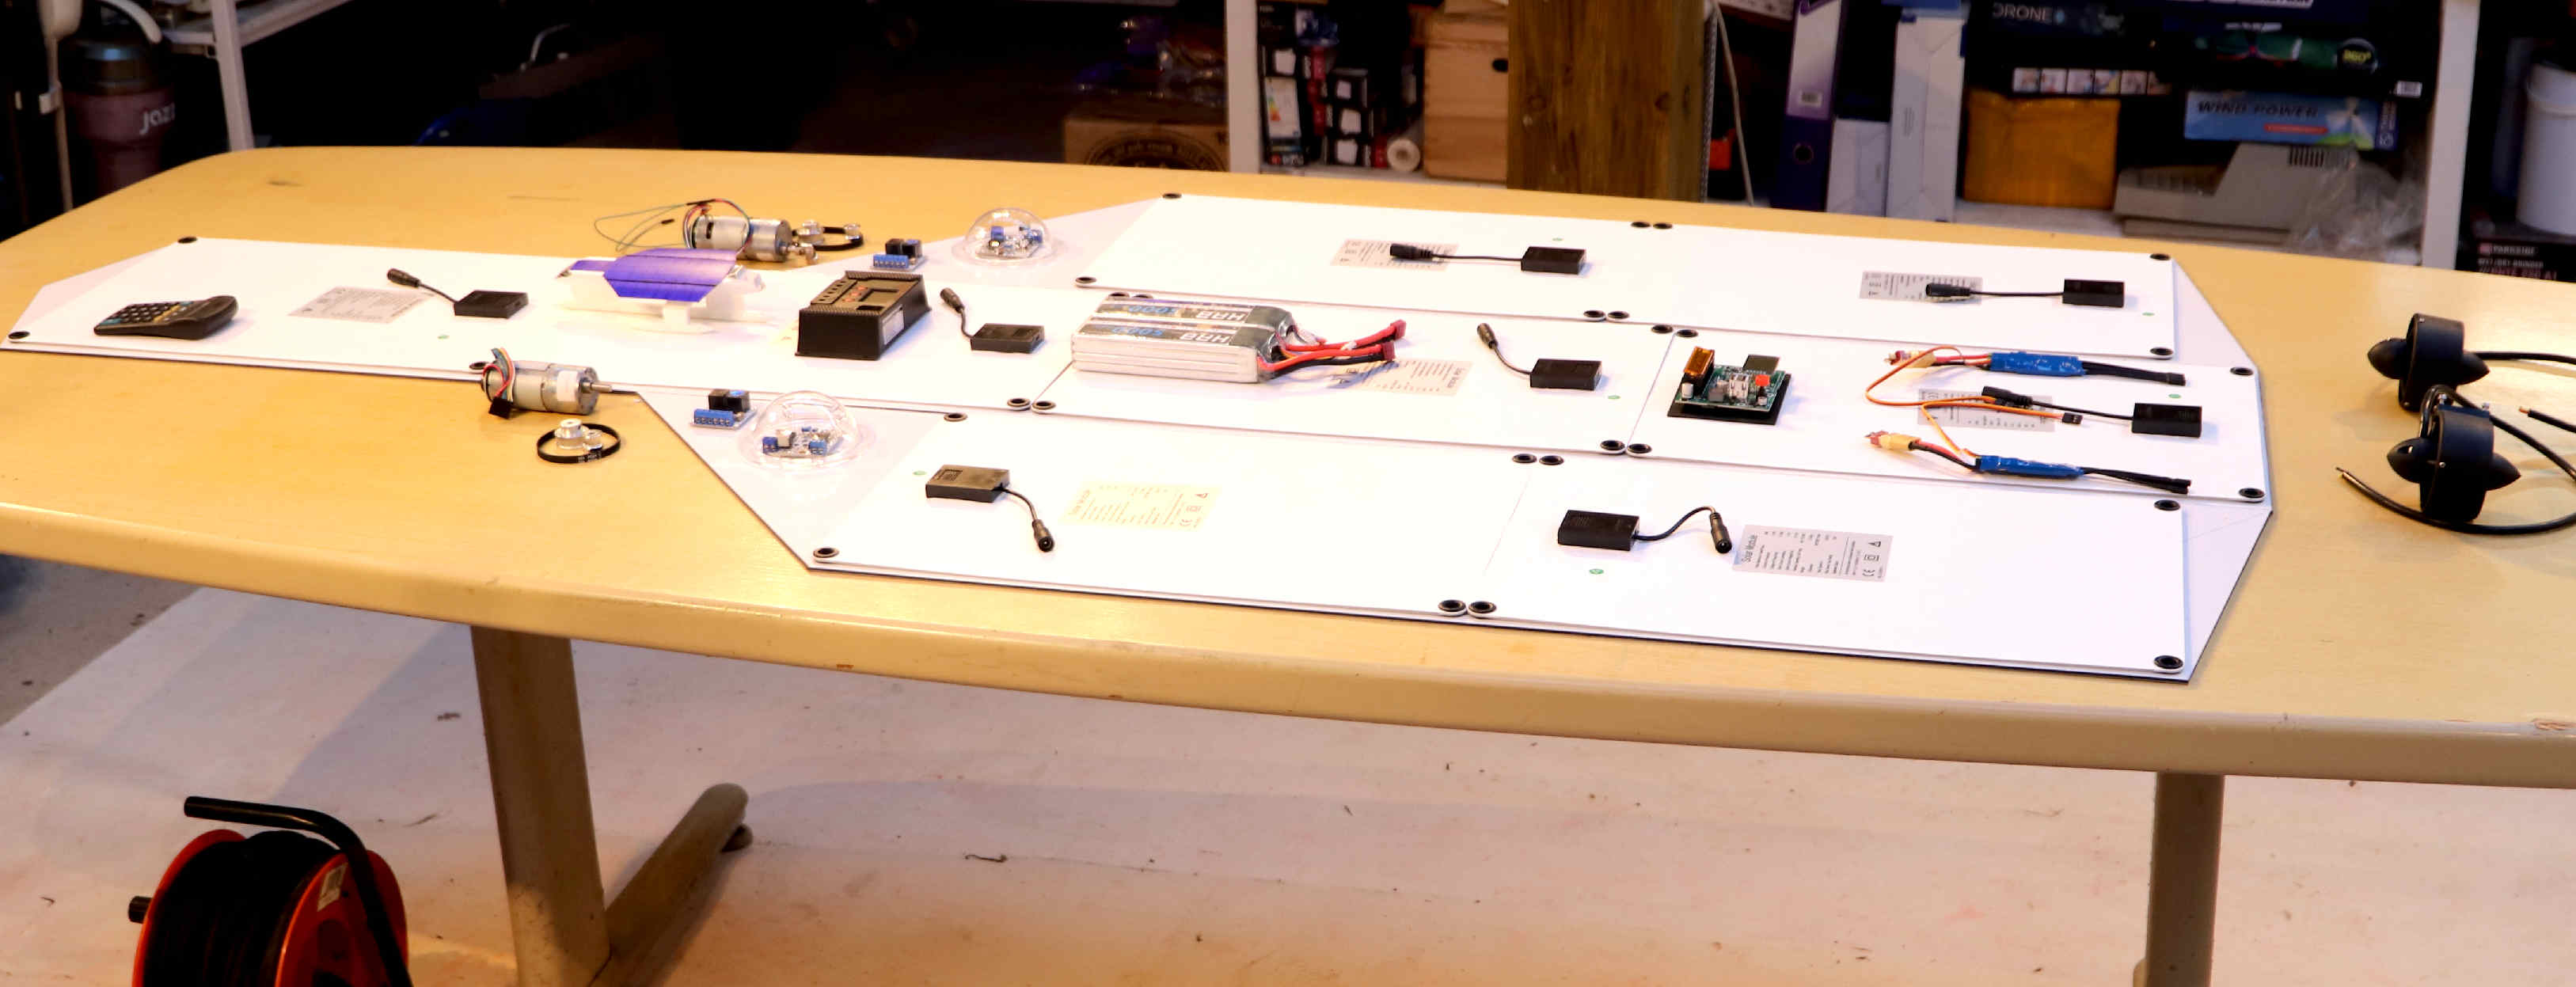 The parts layout of the 1:20th scale proof of concept model